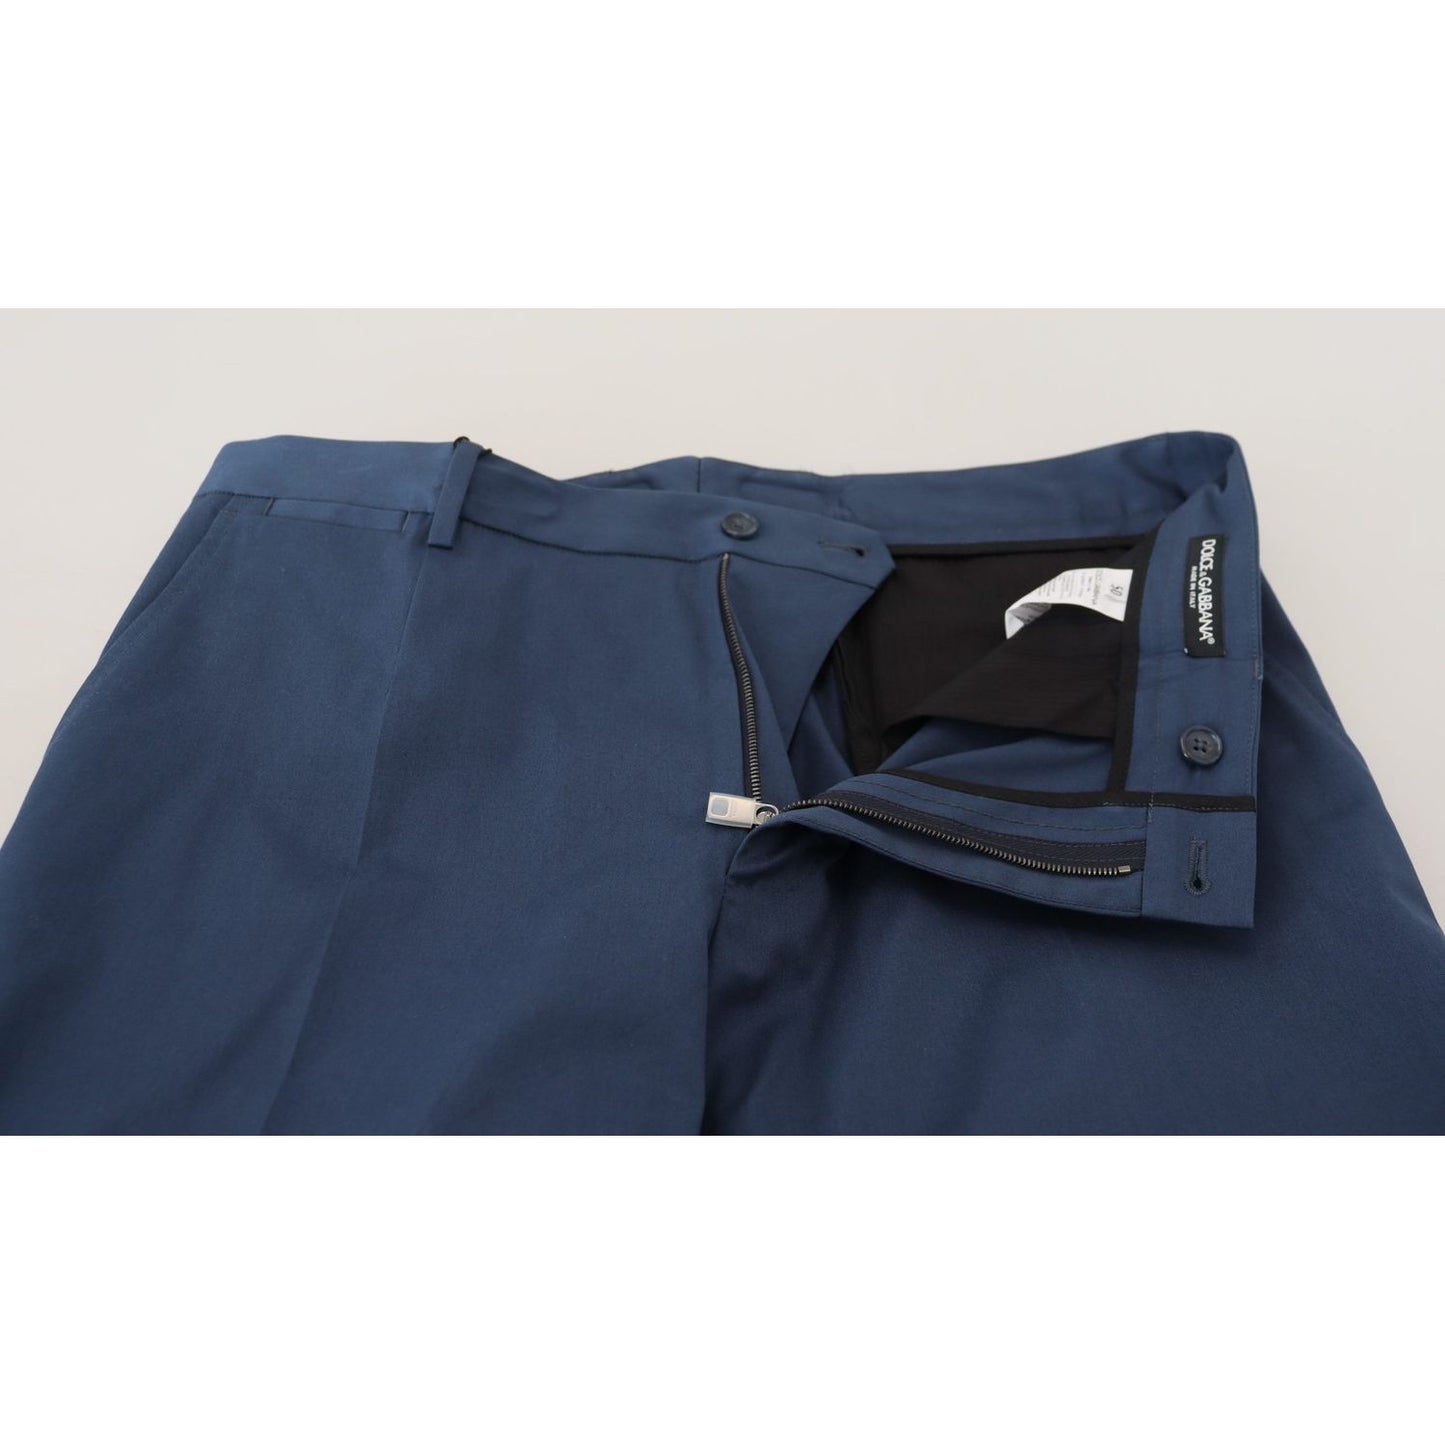 Dolce & Gabbana Elegant Slim Fit Chinos in Blue Jeans & Pants blue-stretch-cotton-slim-trousers-chinos-pants-1